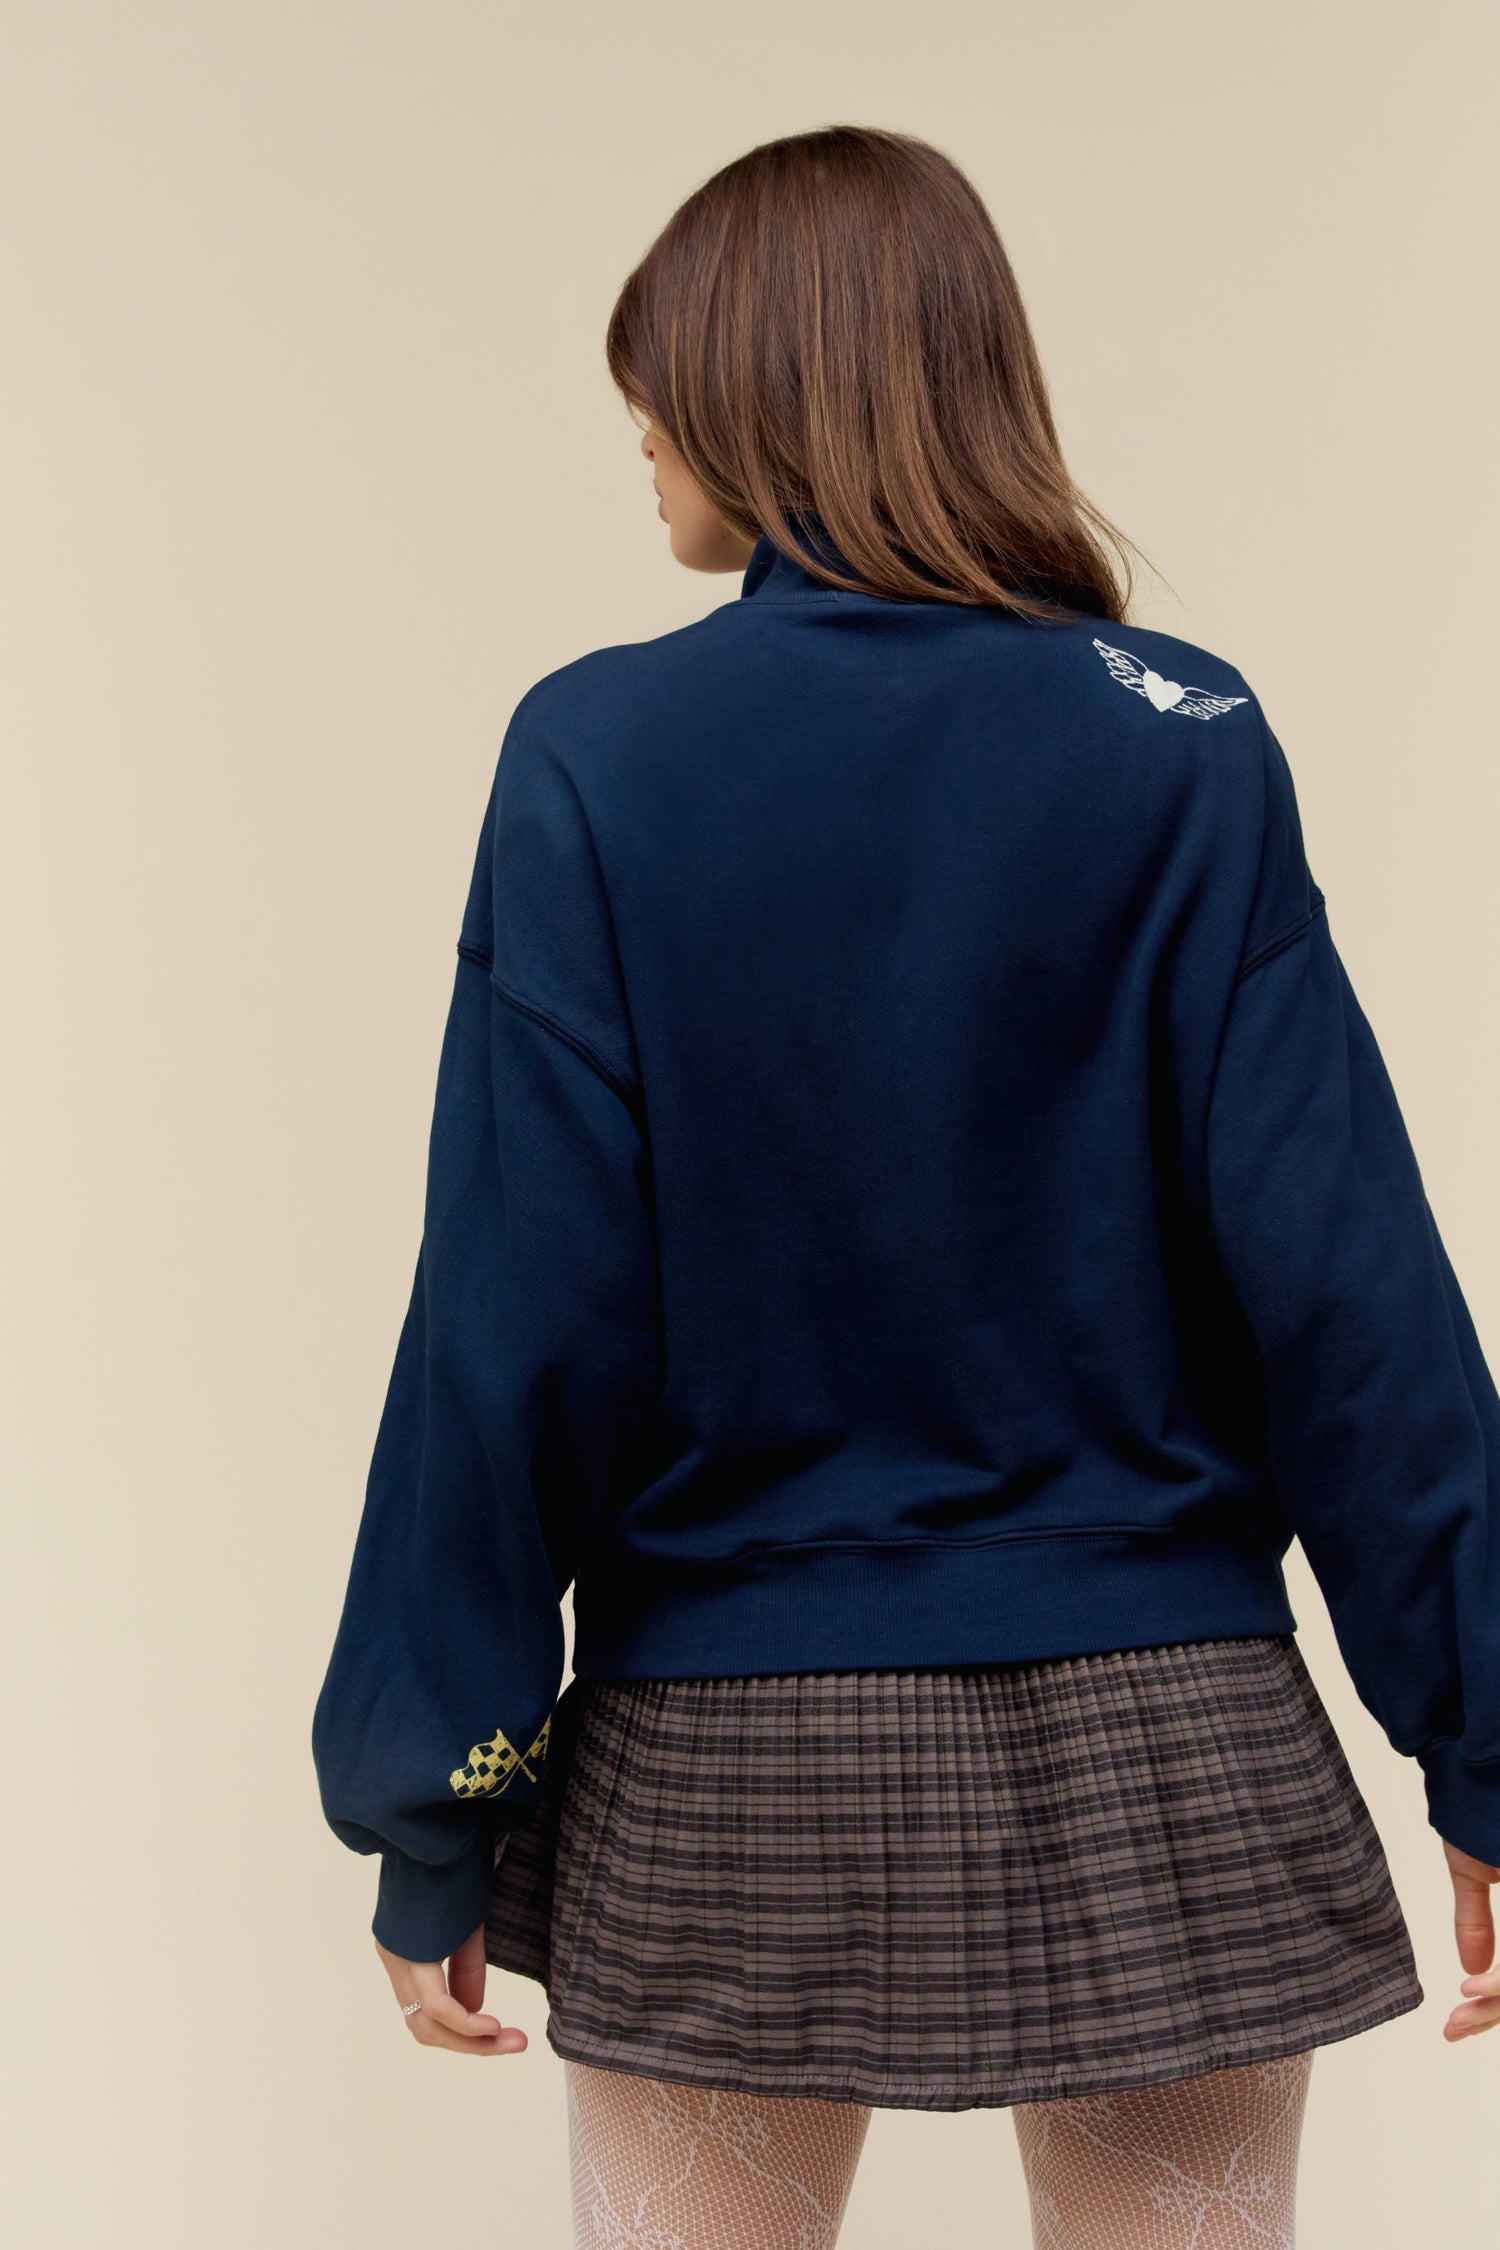 A model featuring a surf navy half zip sweatshirt stamped with DYDRMR CO and DDLA.